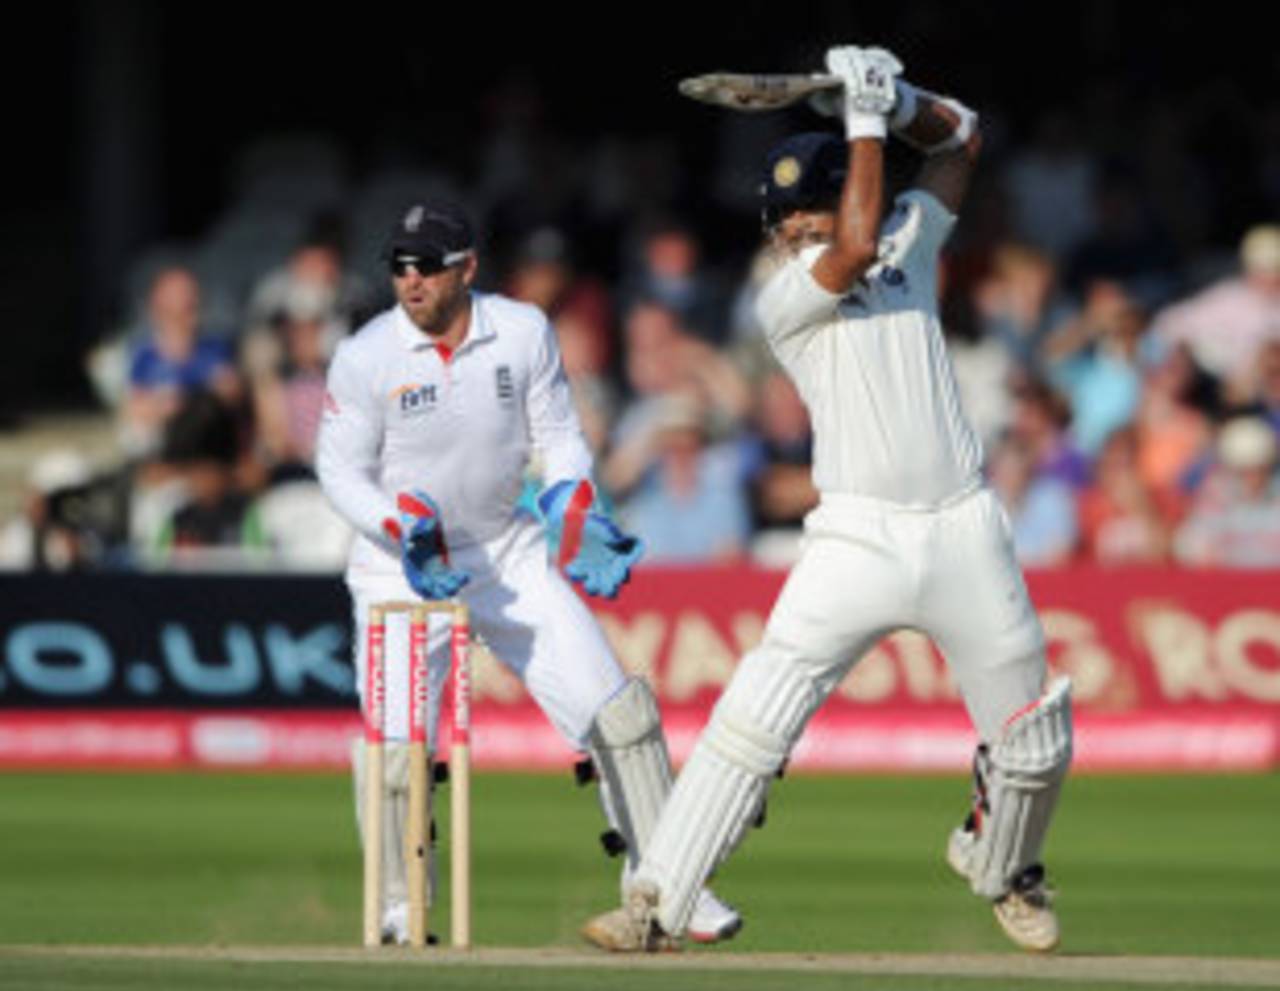 Rahul Dravid guides one through point, England v India, 1st Test, Lord's, 4th day, July 24, 2011